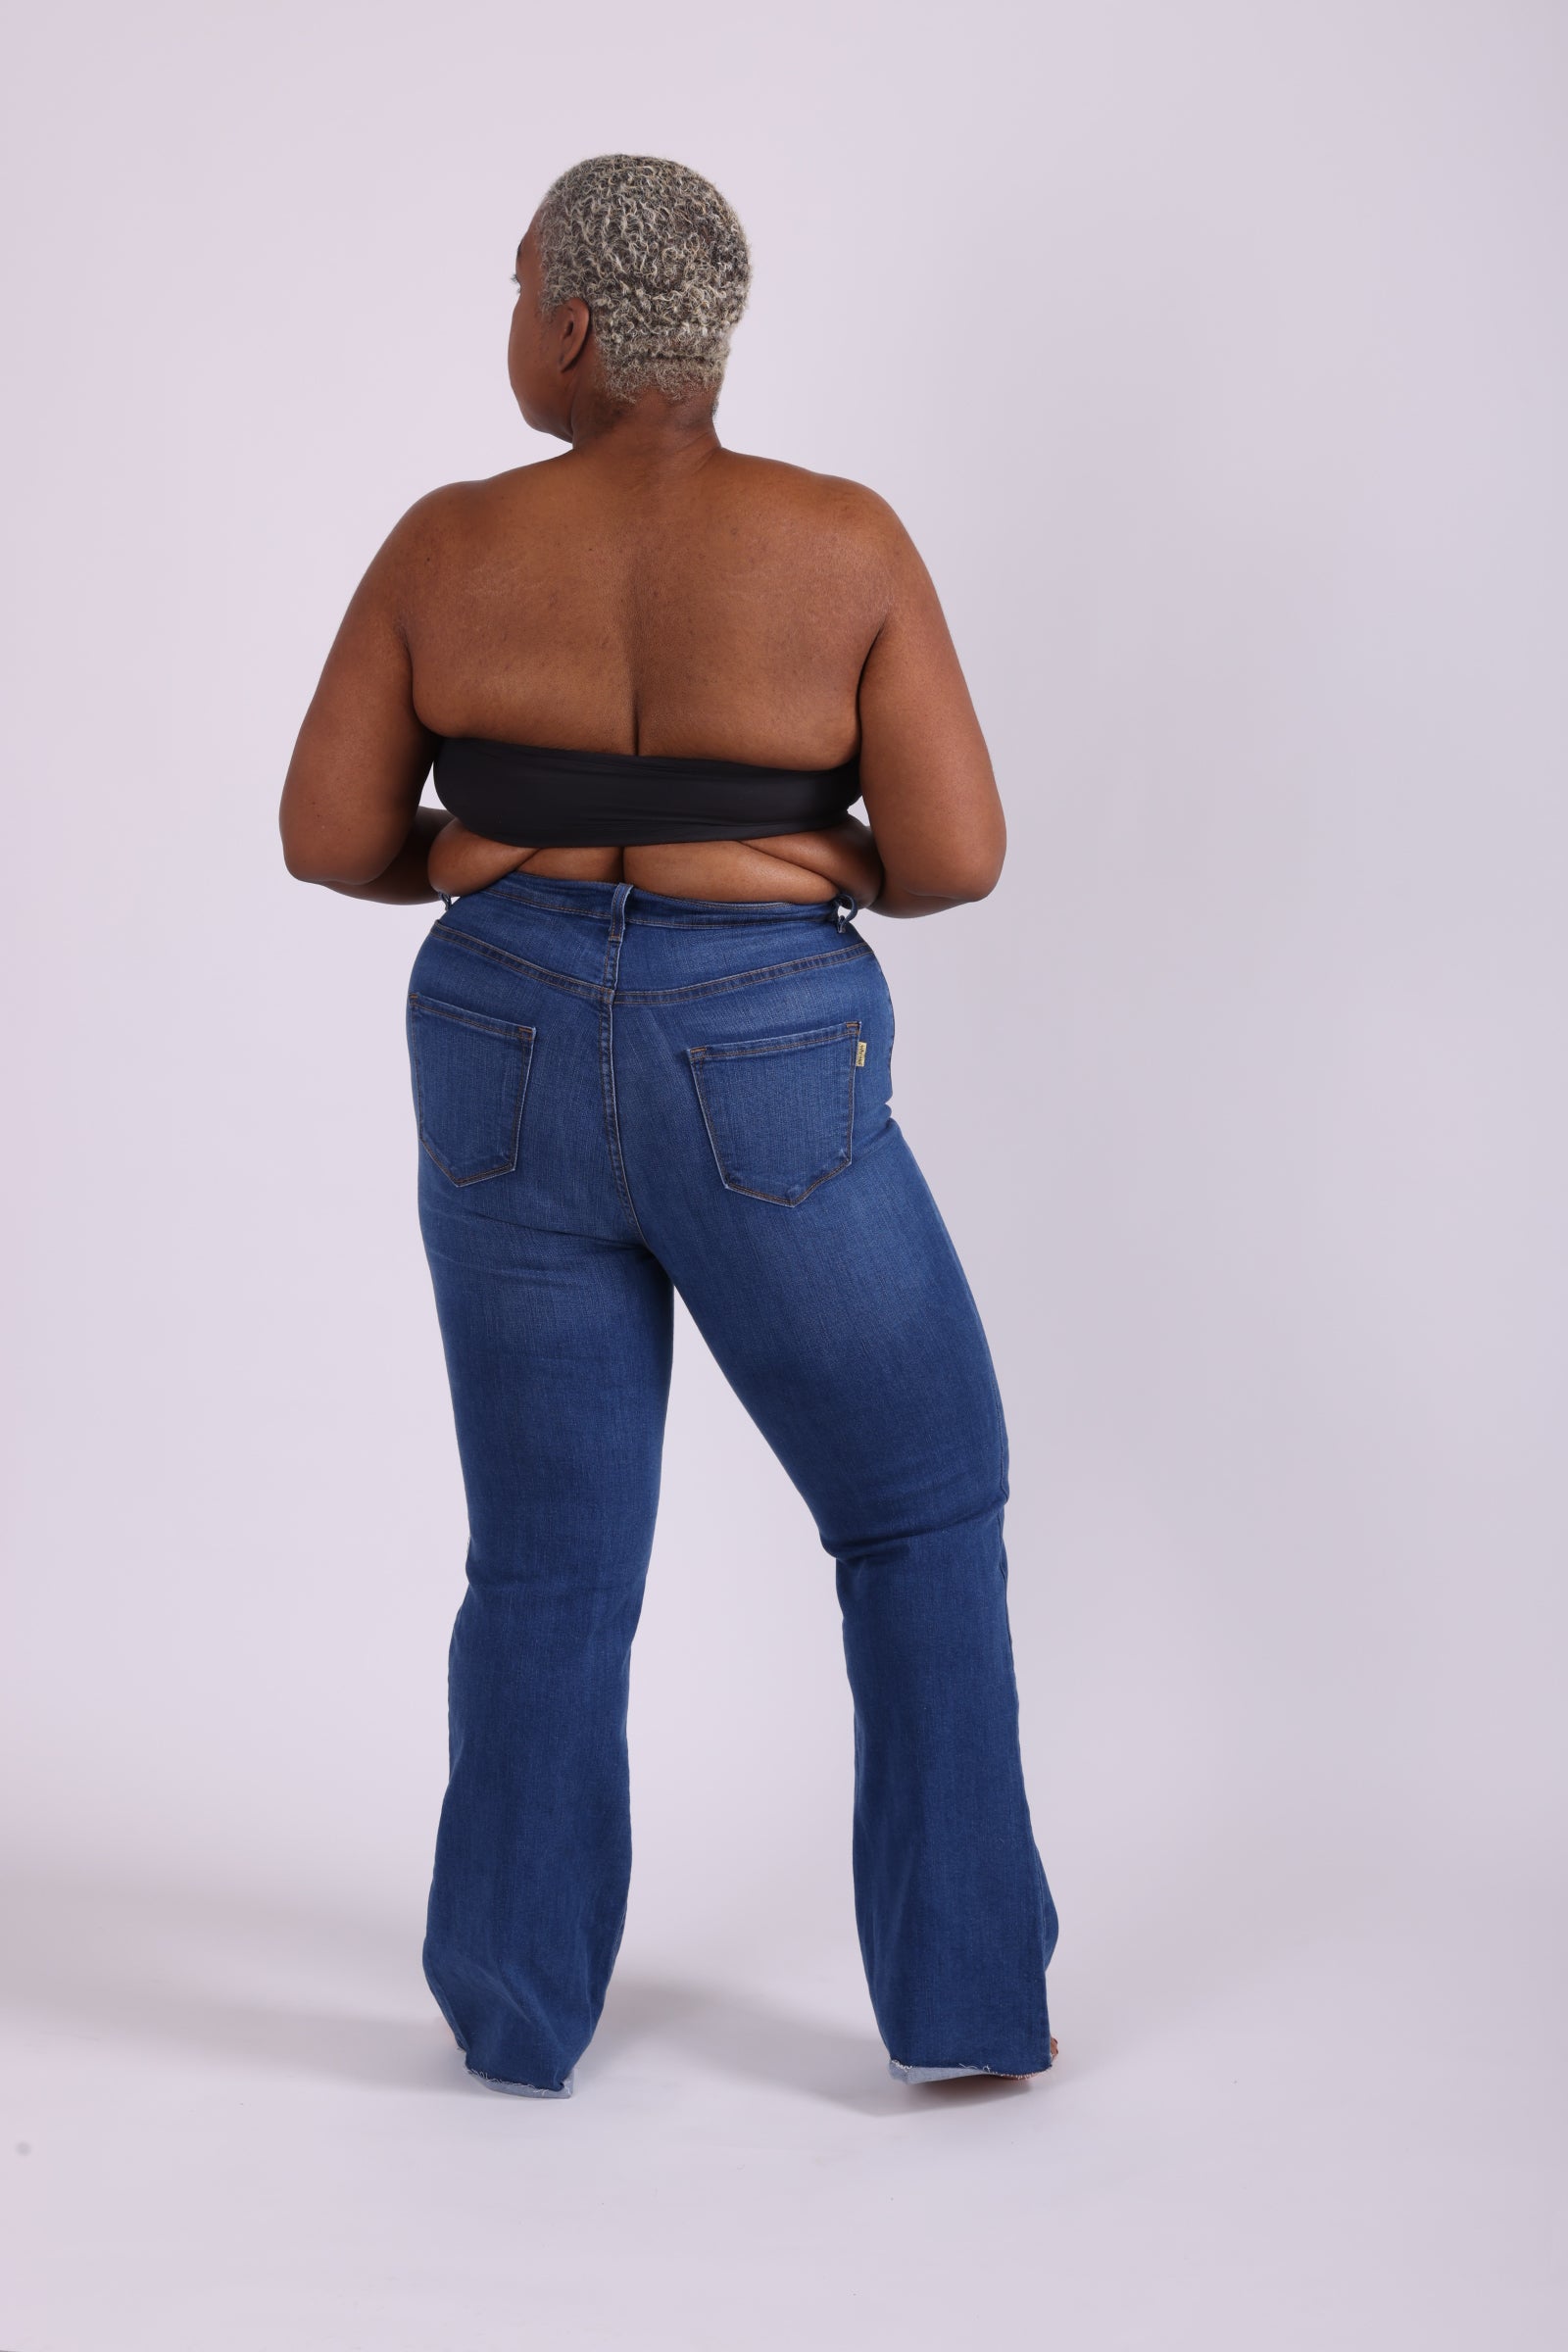 Plus-Size Ripped Flared Leg Black Jeans - 3x  Bell bottom jeans, Curvy  outfits, Plus size jeans